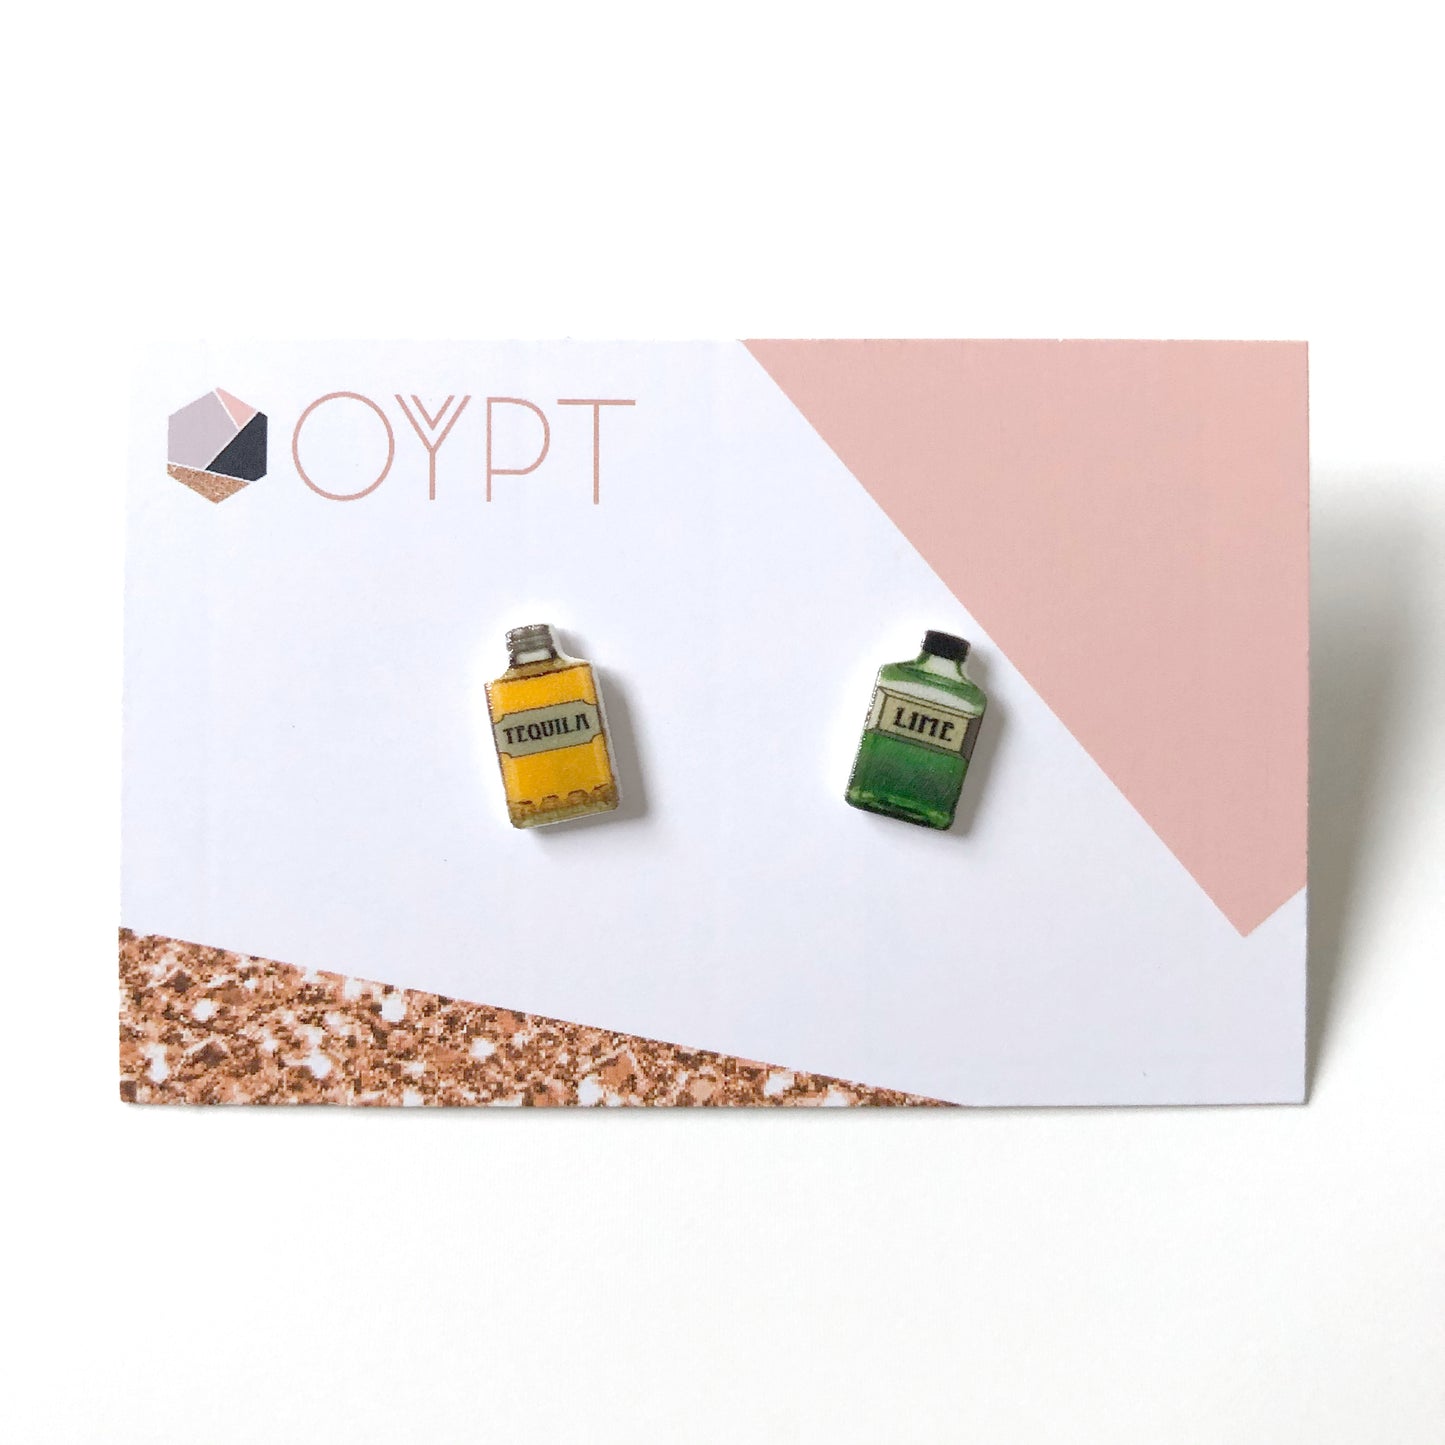 Tequila and lime bottle stud earrings - Quirky gift for friends